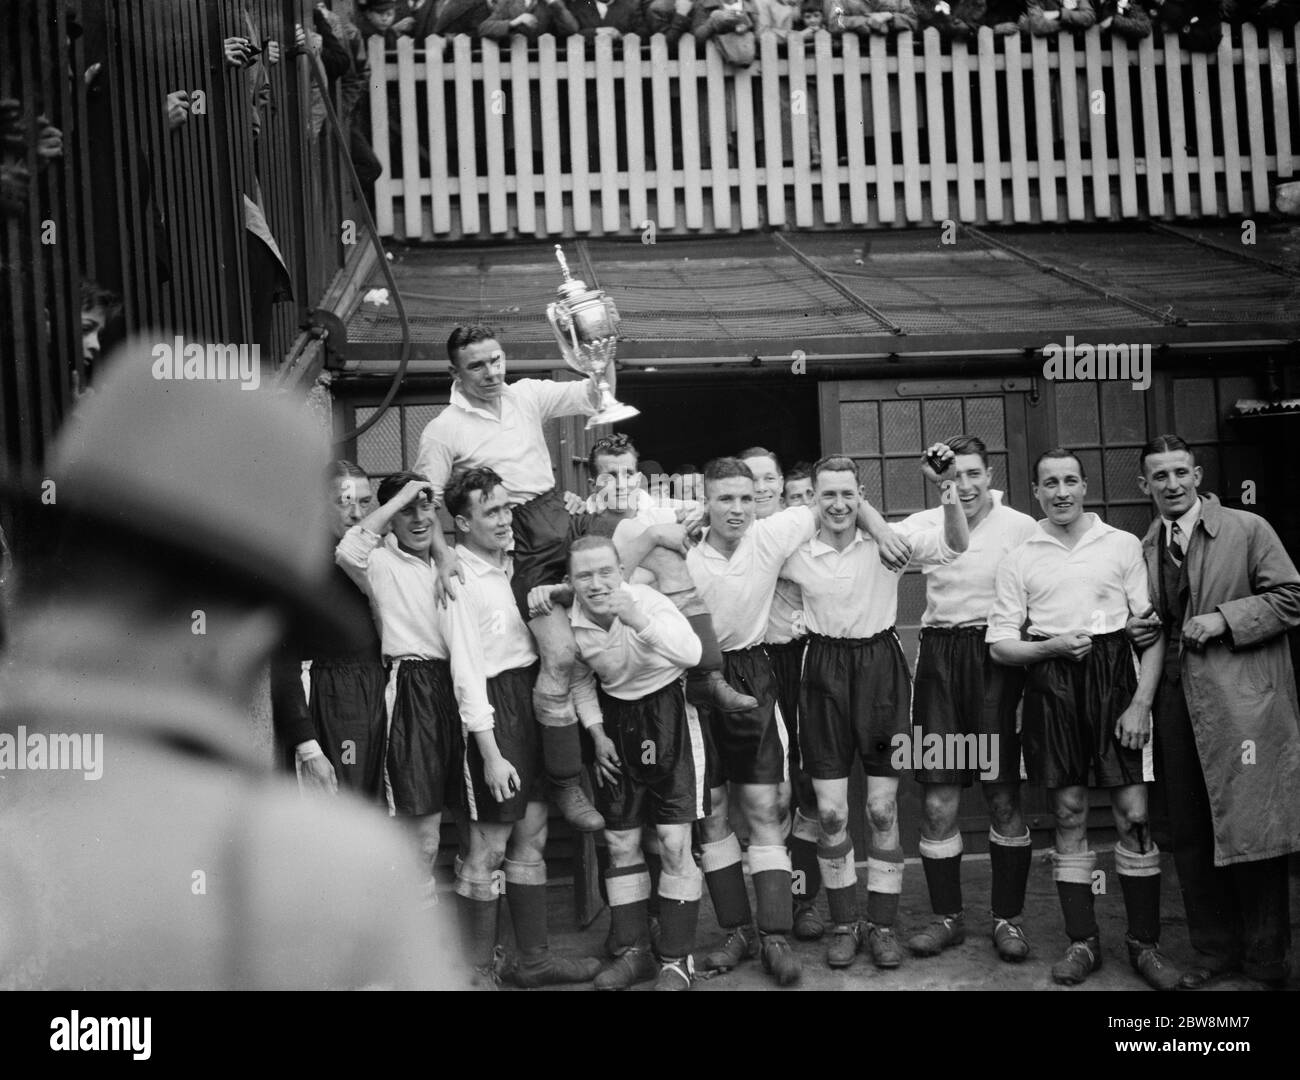 Bromley football club versus Belvedere football club in the FA Amateur Cup  Final at Millwall football club stadium the The Den in South Bermondsey,  London . Bromley the winning team hold the